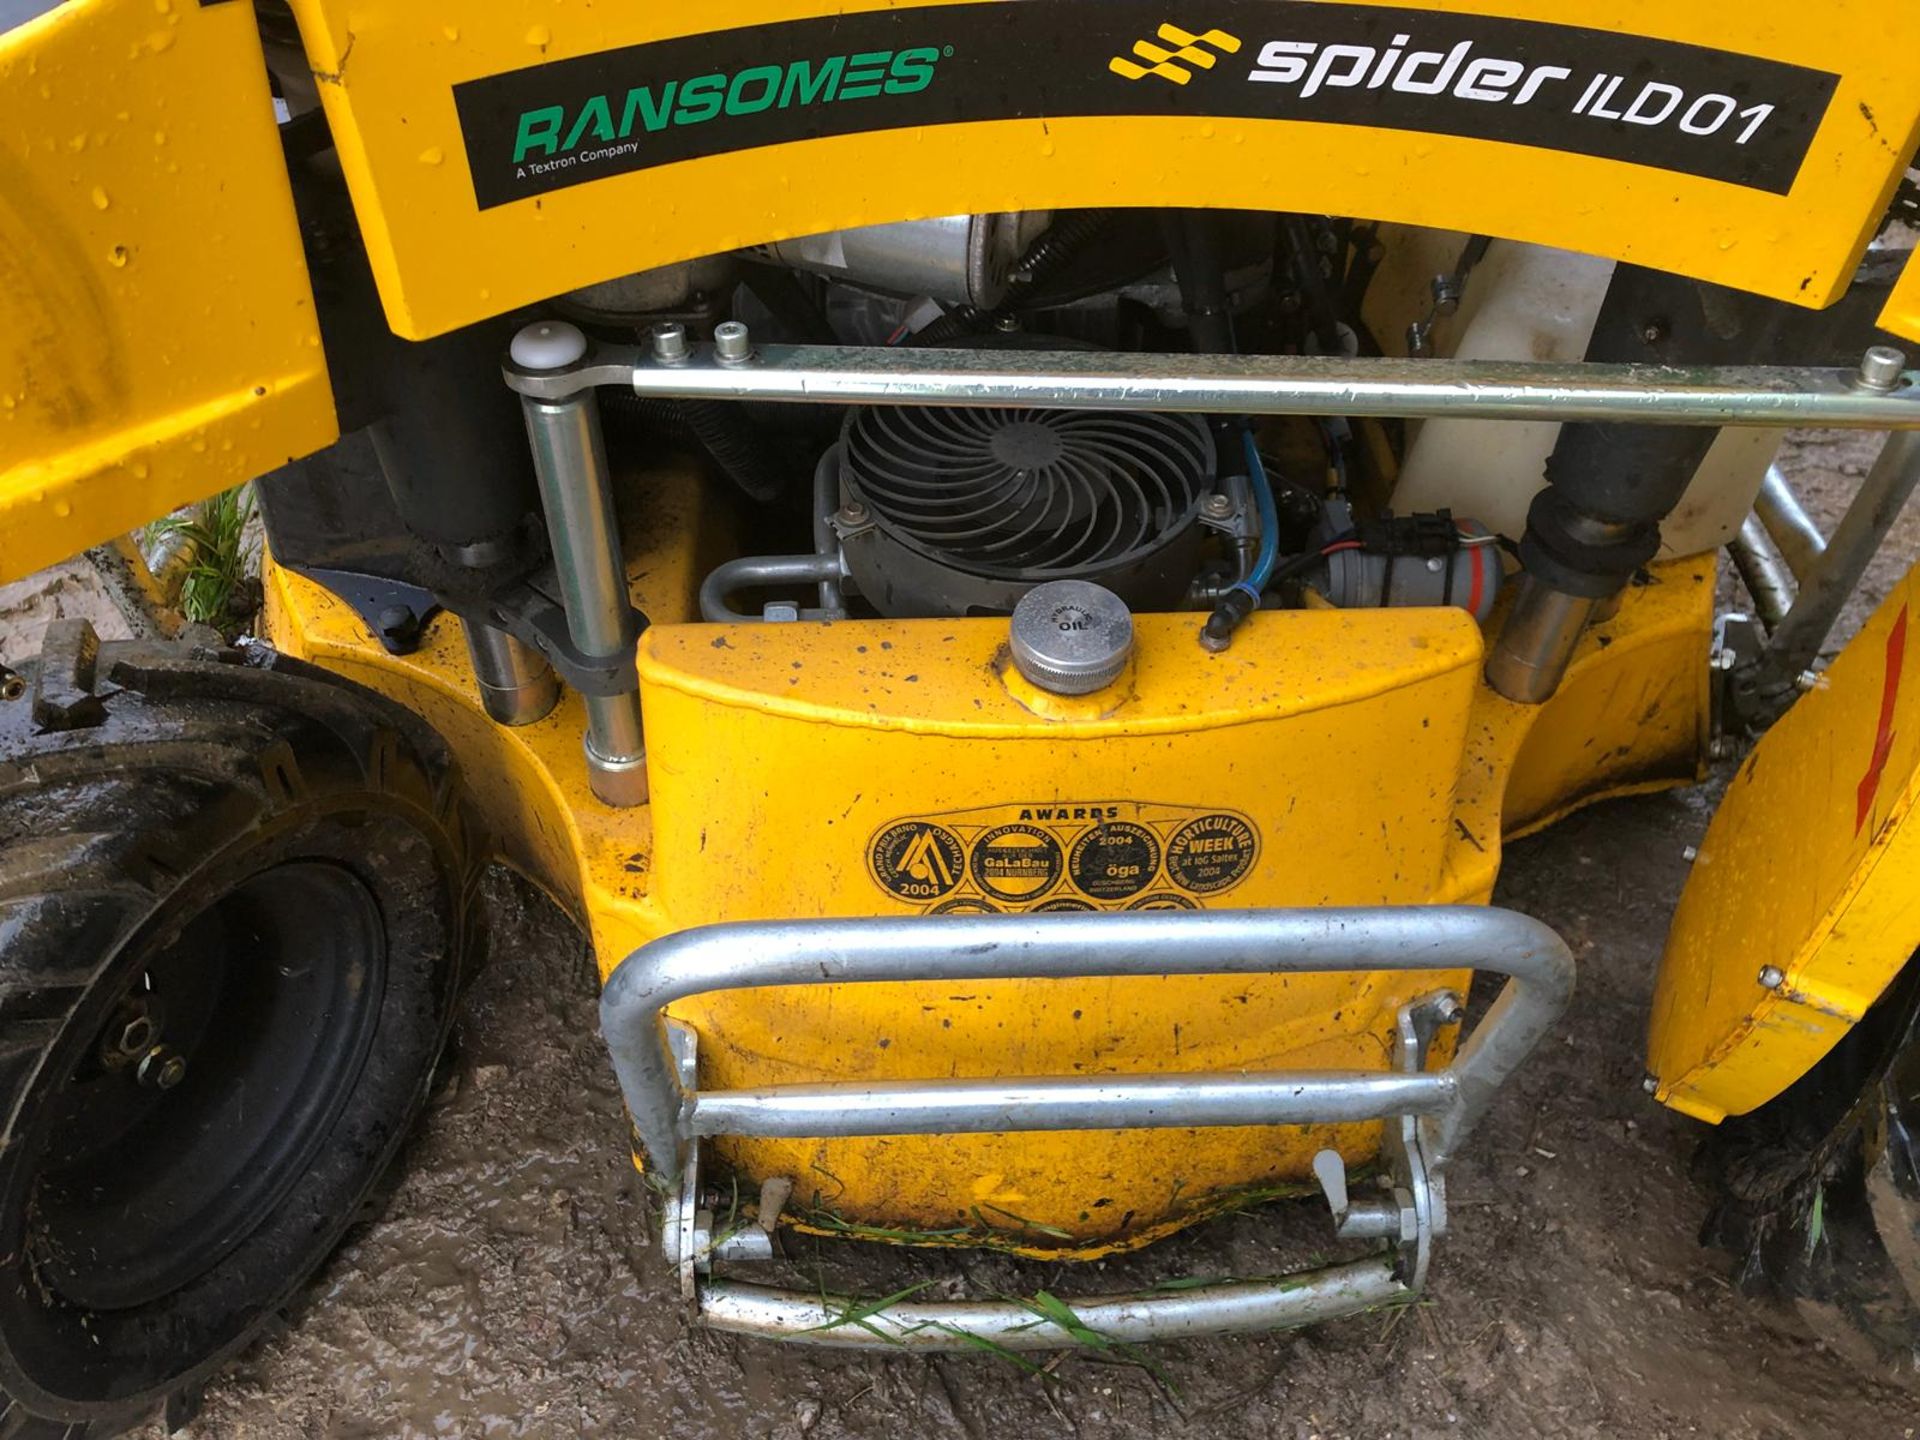 2014 SPIDER ILD01 RADIO-CONTROLLED SLOPE BANK MOWER WITH CONTROL BOX, STARTS, DRIVES, MOWS *PLUS VAT - Image 17 of 17